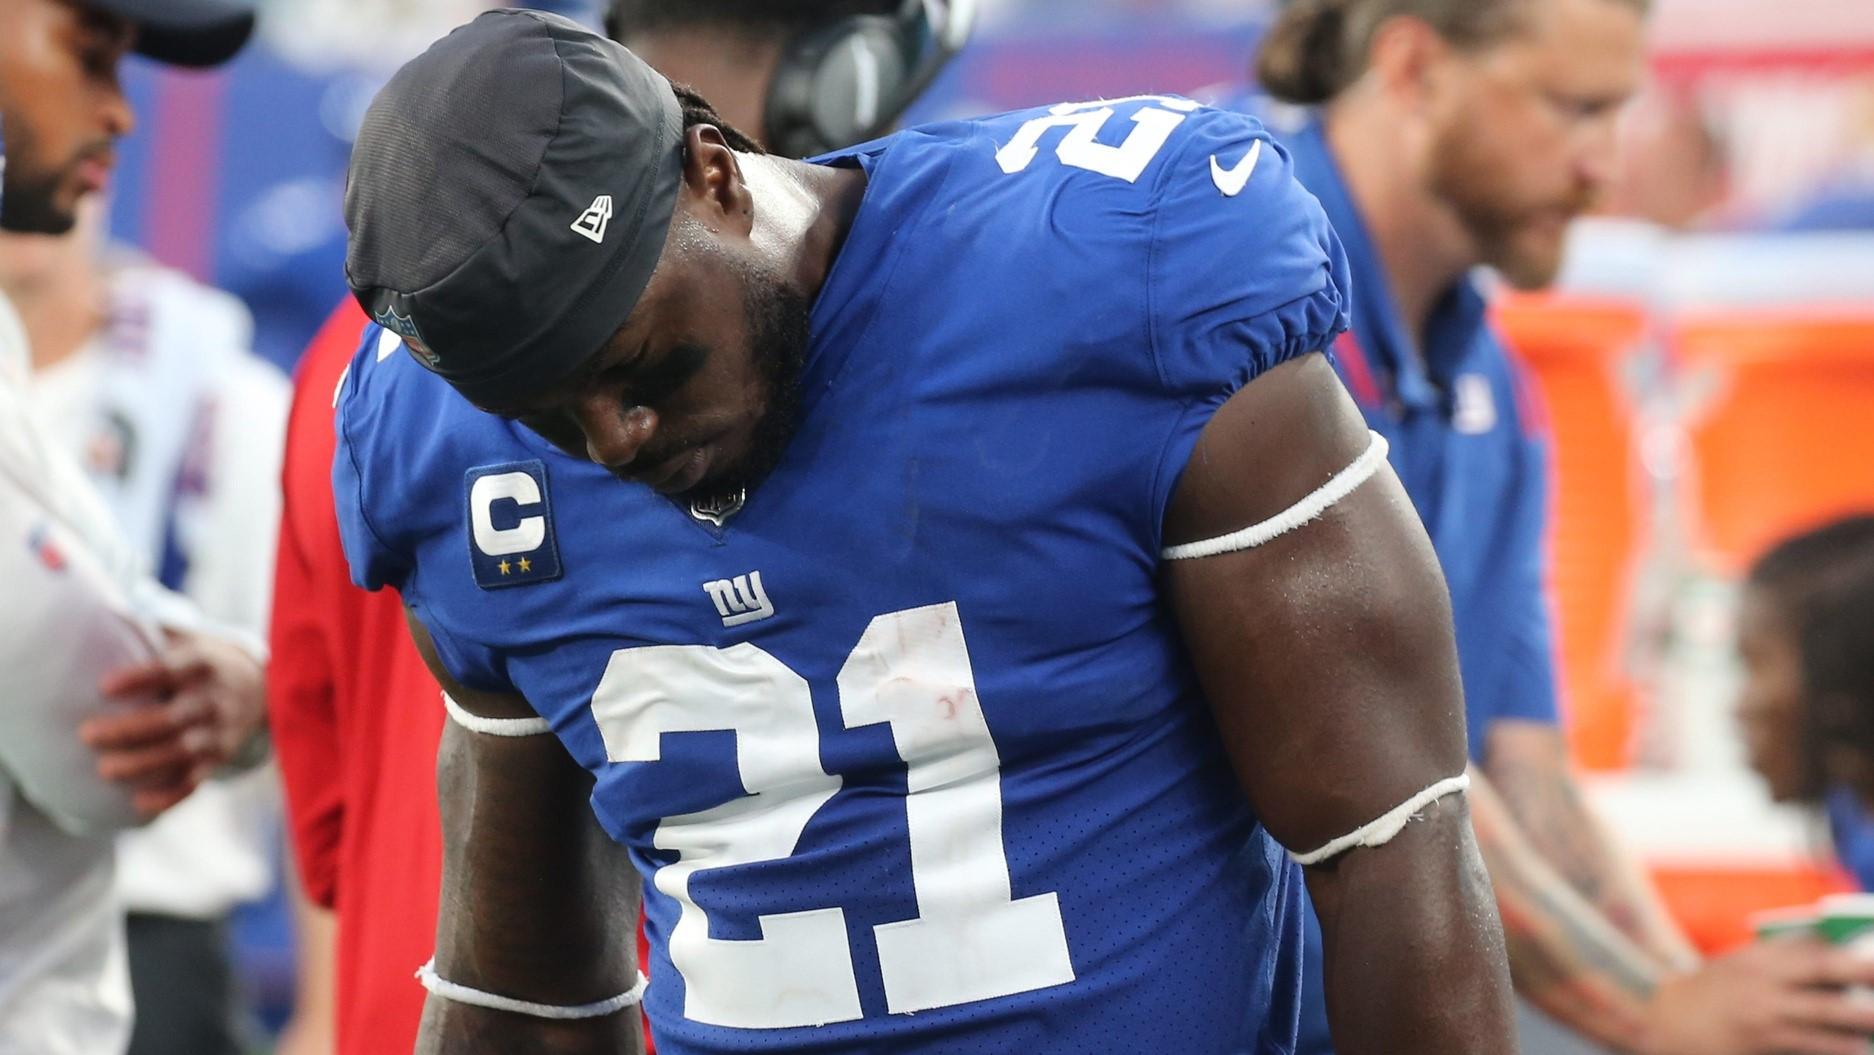 Jabrill Peppers of the Giants on the sidelines in the fourth quarter as the Denver Broncos came to MetLife Stadium in East Rutherford, NJ and beat the New York Giants 27-13 in the first game of the 2021 season on September 12, 2021 / Chris Pedota, NorthJersey.com via Imagn Content Services,